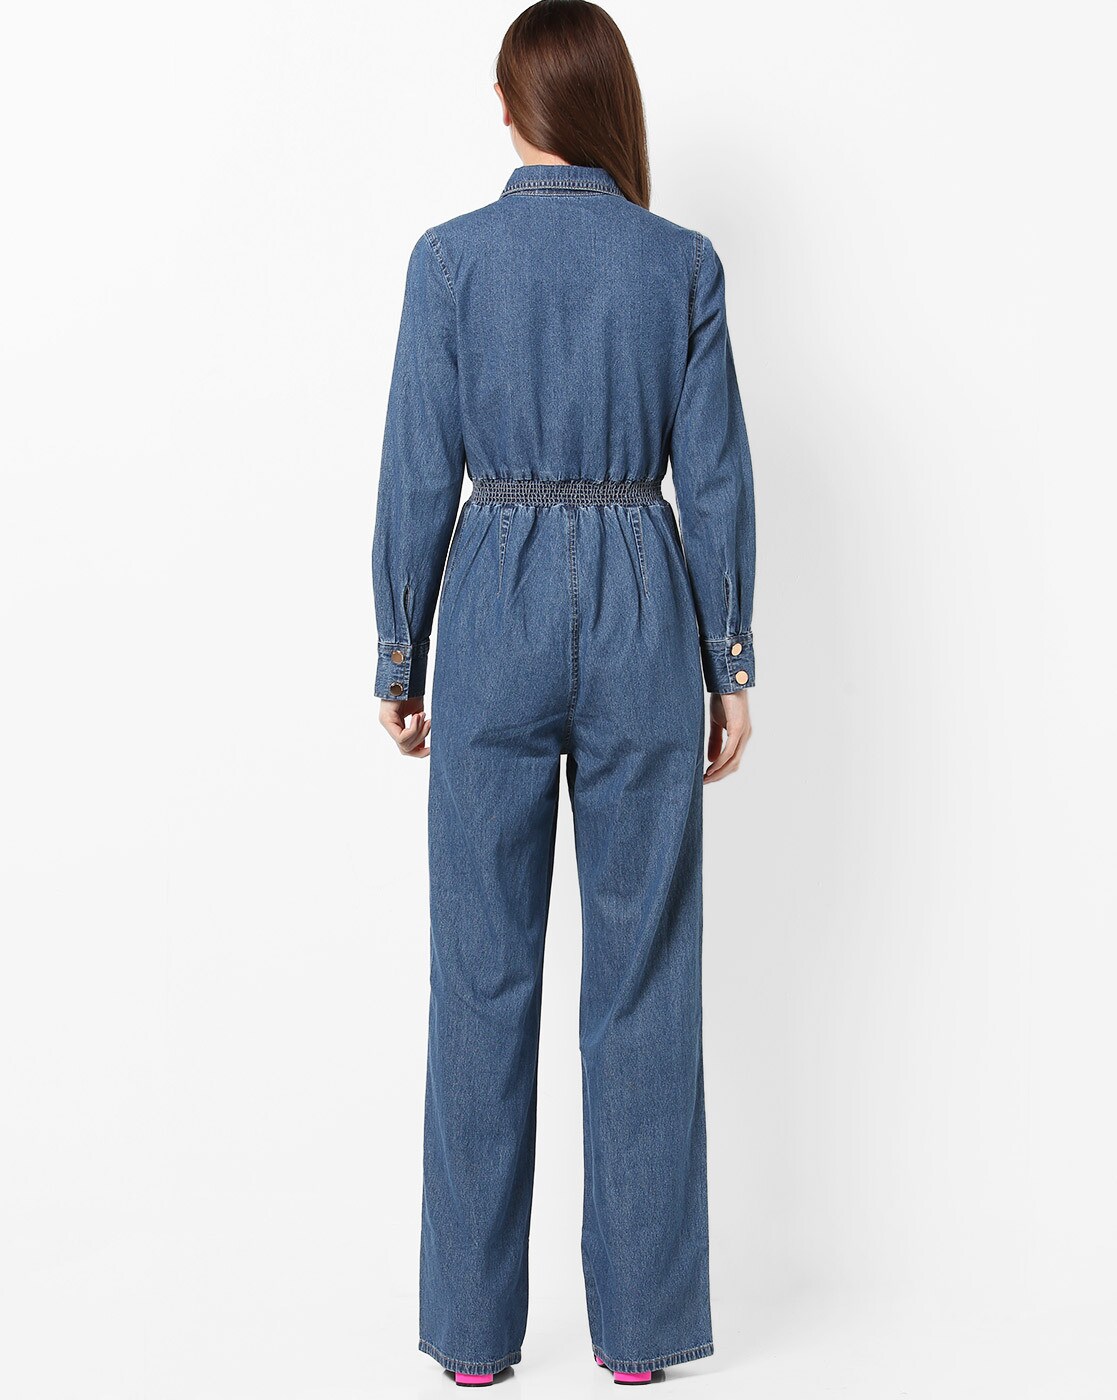 Buy Indigo Jumpsuits &Playsuits for Women by MISS PLAYERS Online | Ajio.com